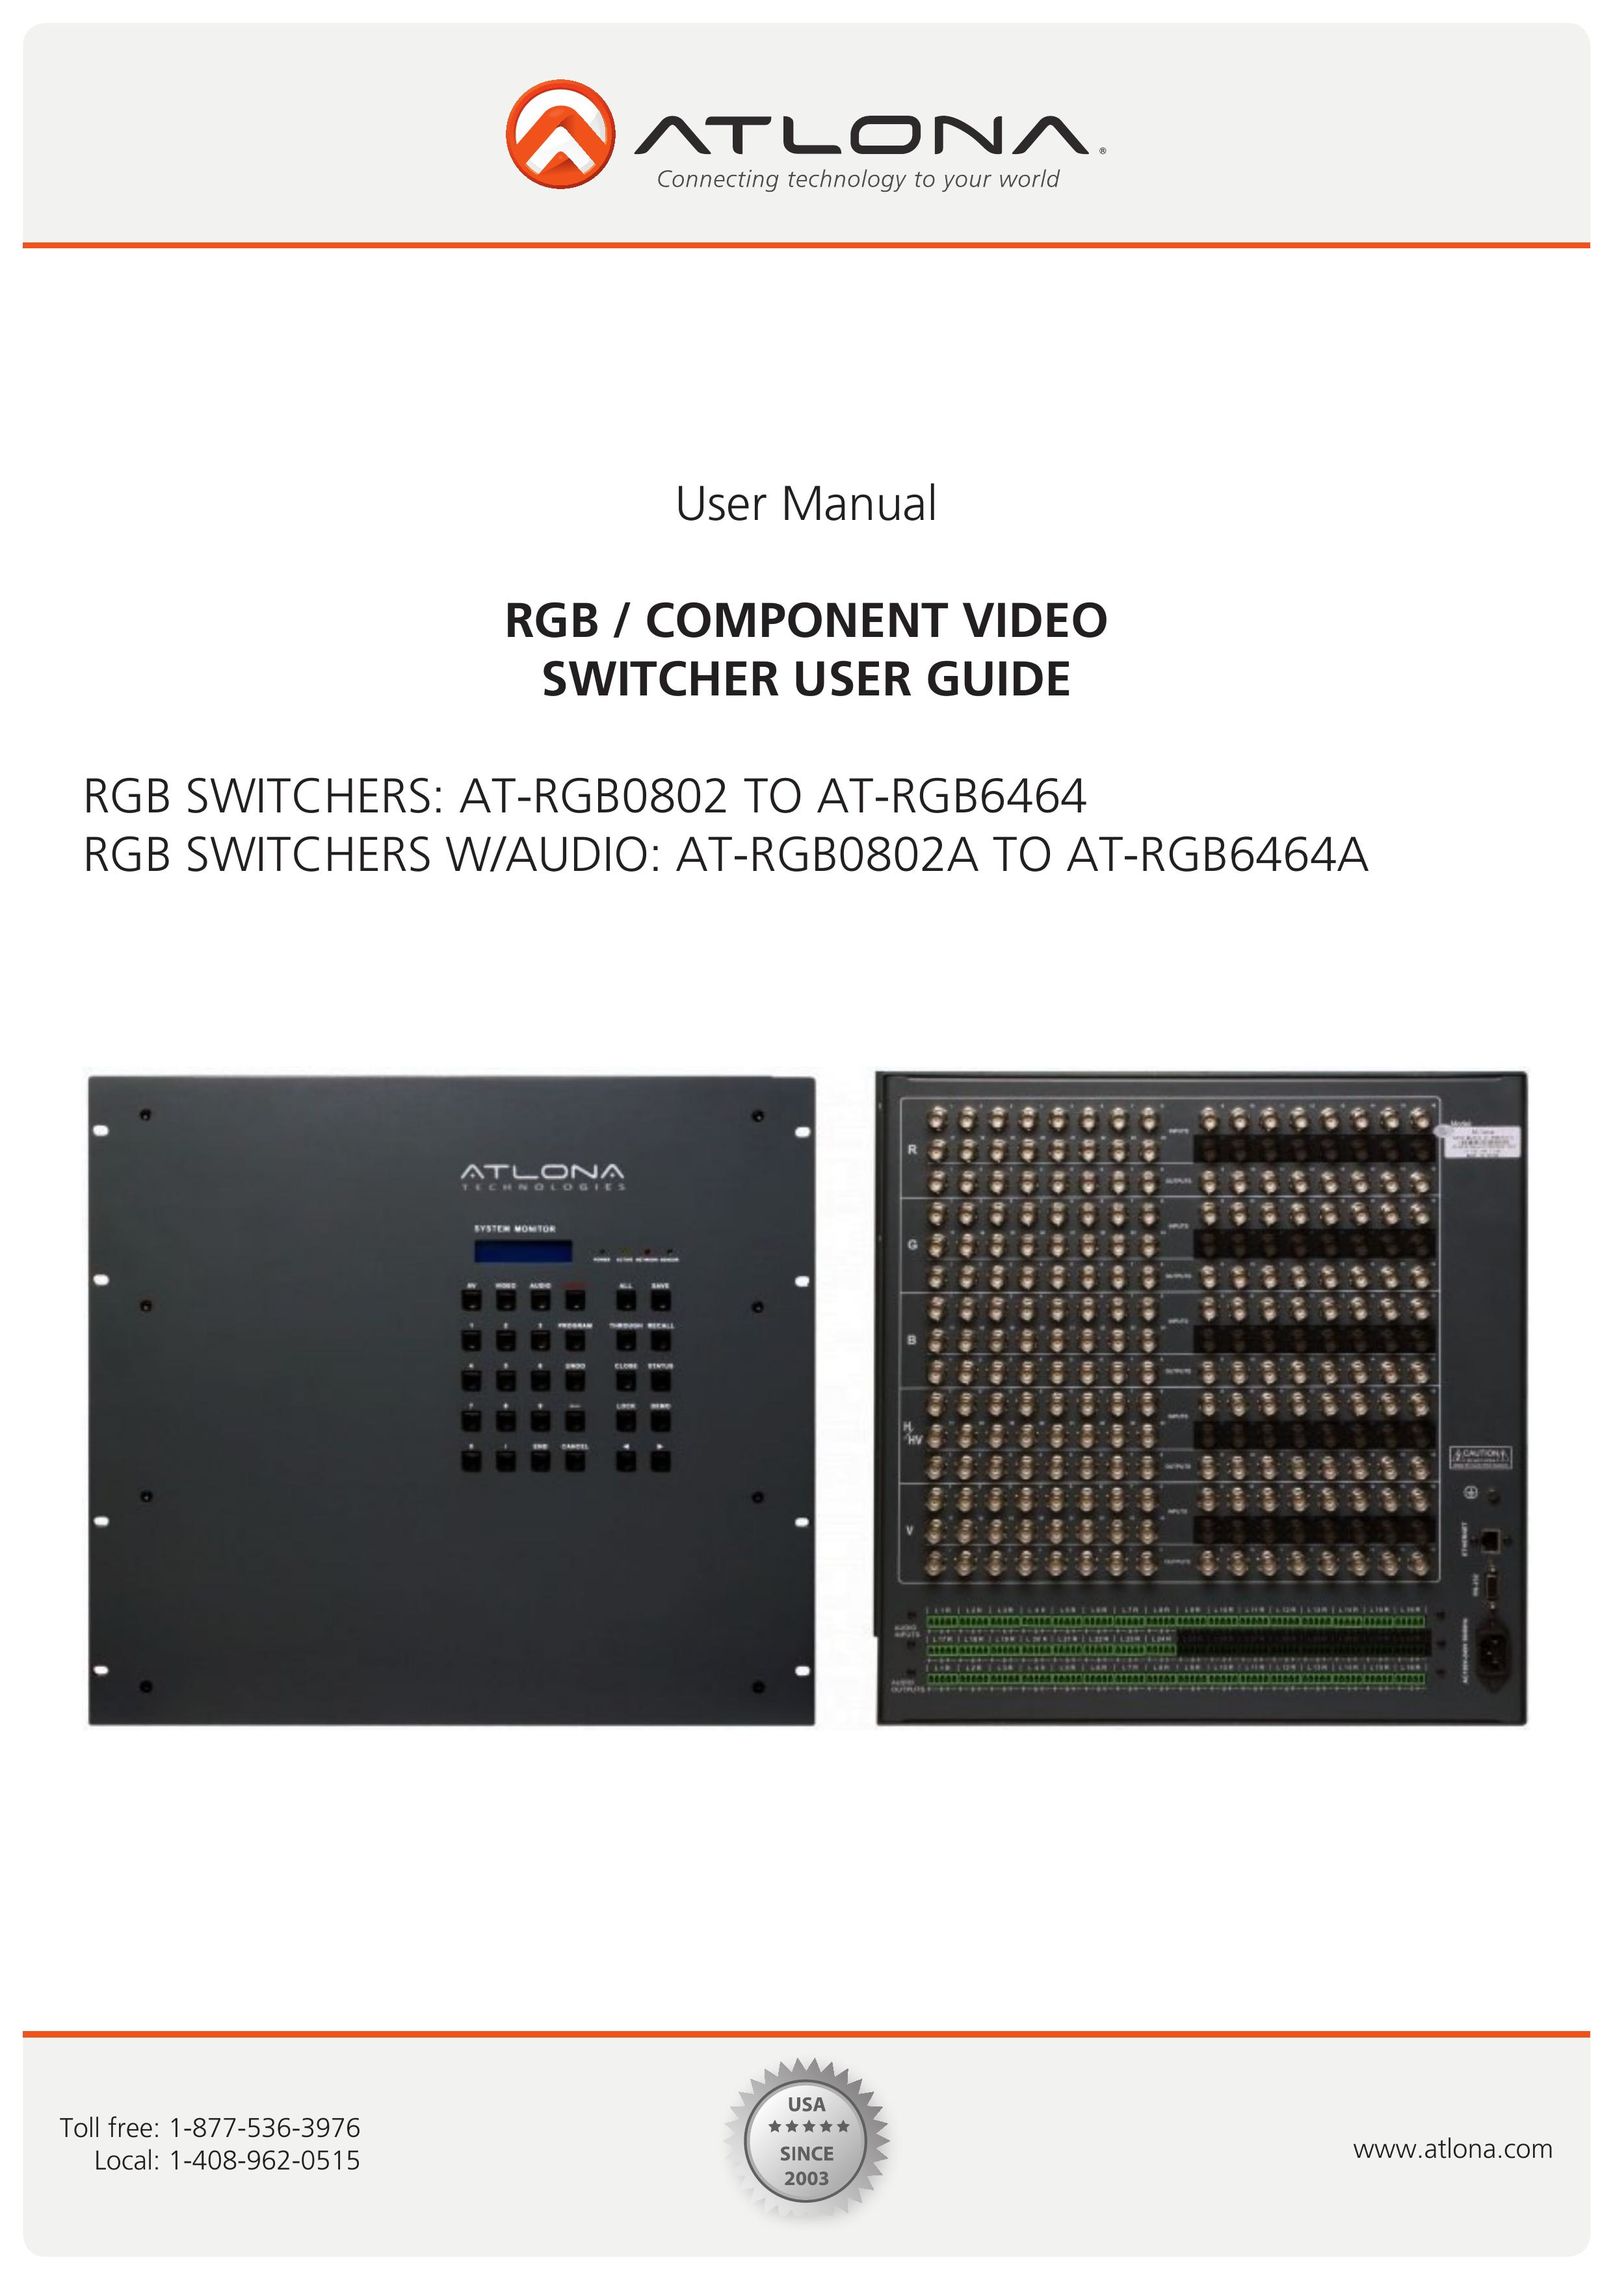 Atlona AT-RGB6464A Switch User Manual